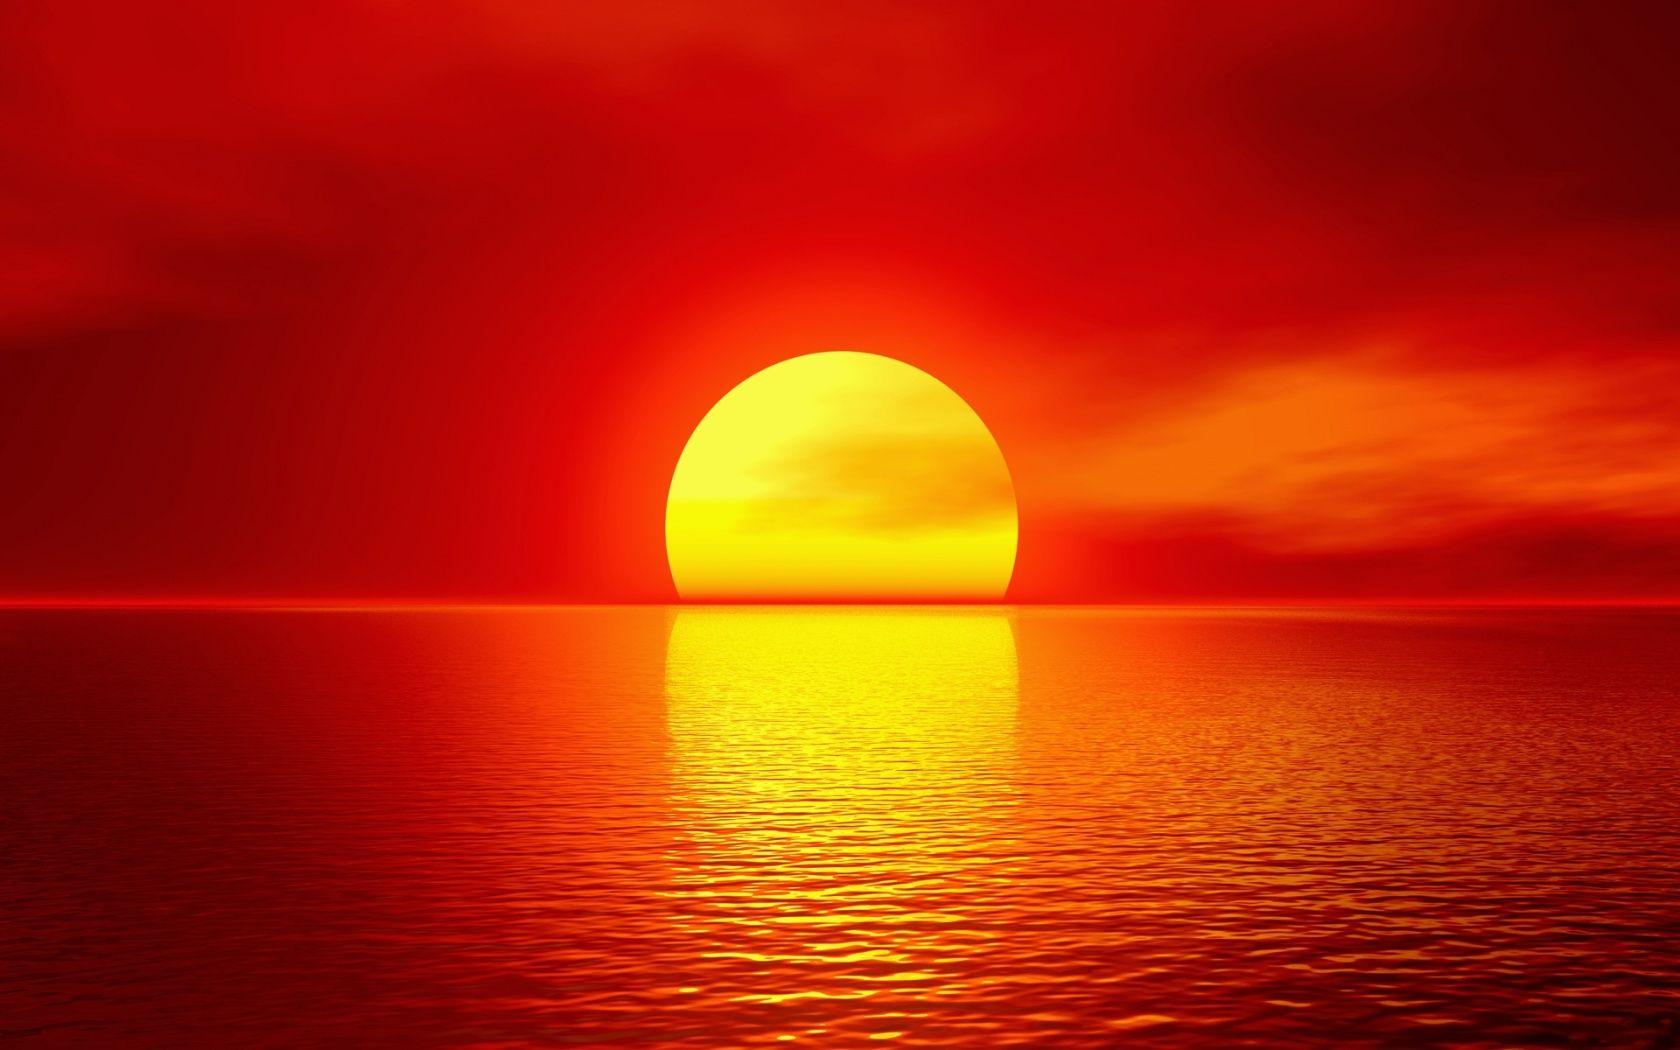 Sun Imagex1050 beauty of red sun Wallpaper and stock